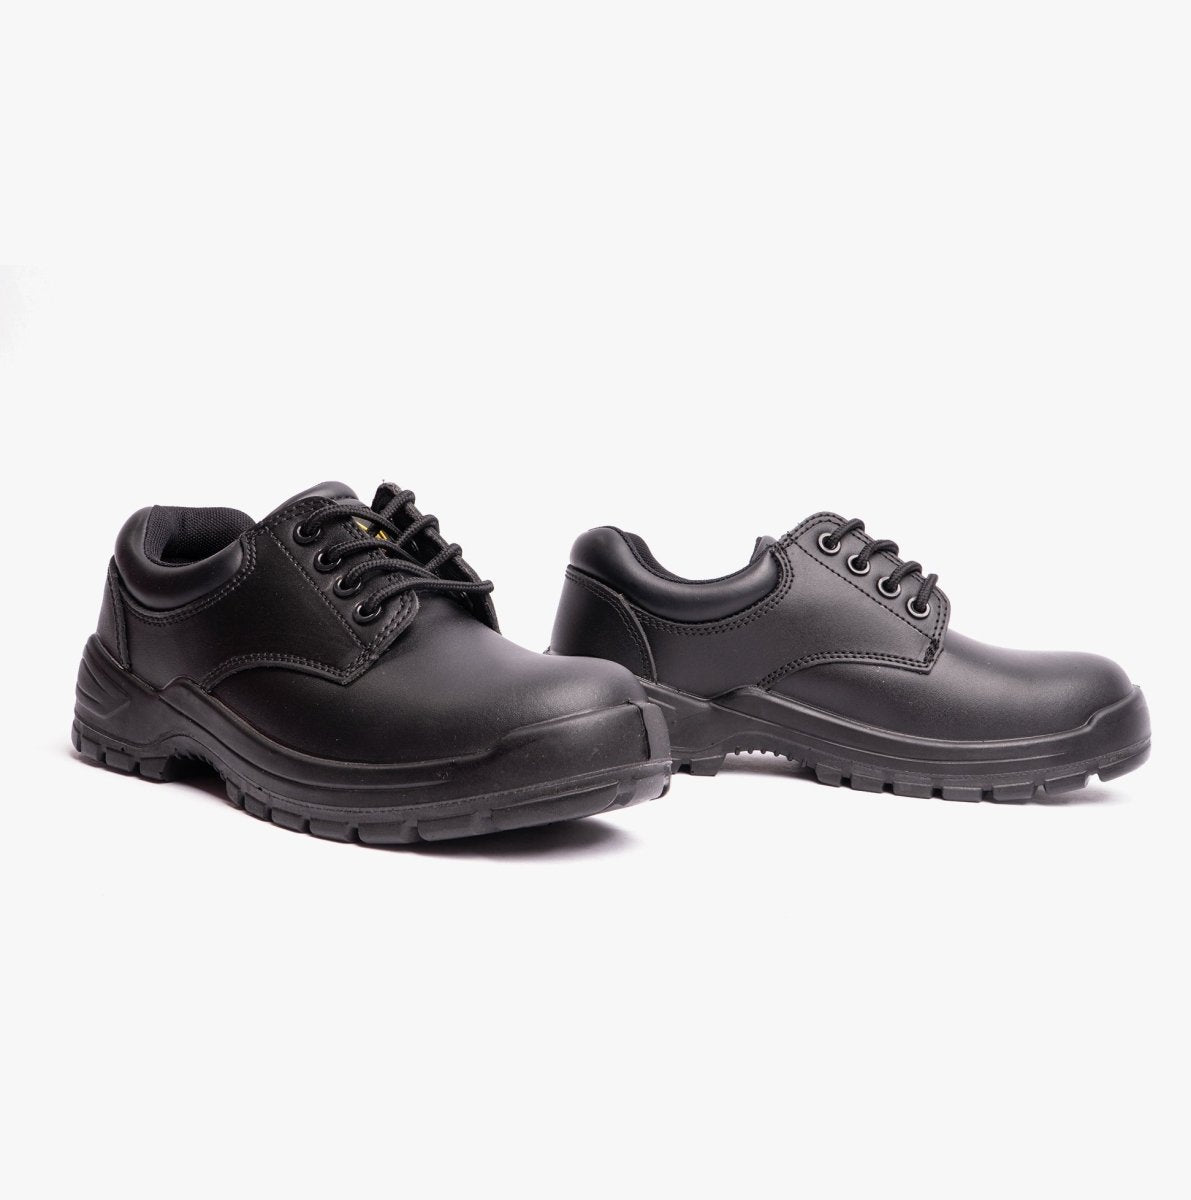 Amblers Safety FS38C Unisex Leather Safety Shoes Black 02459 - 00793 - 01 | STB.co.uk